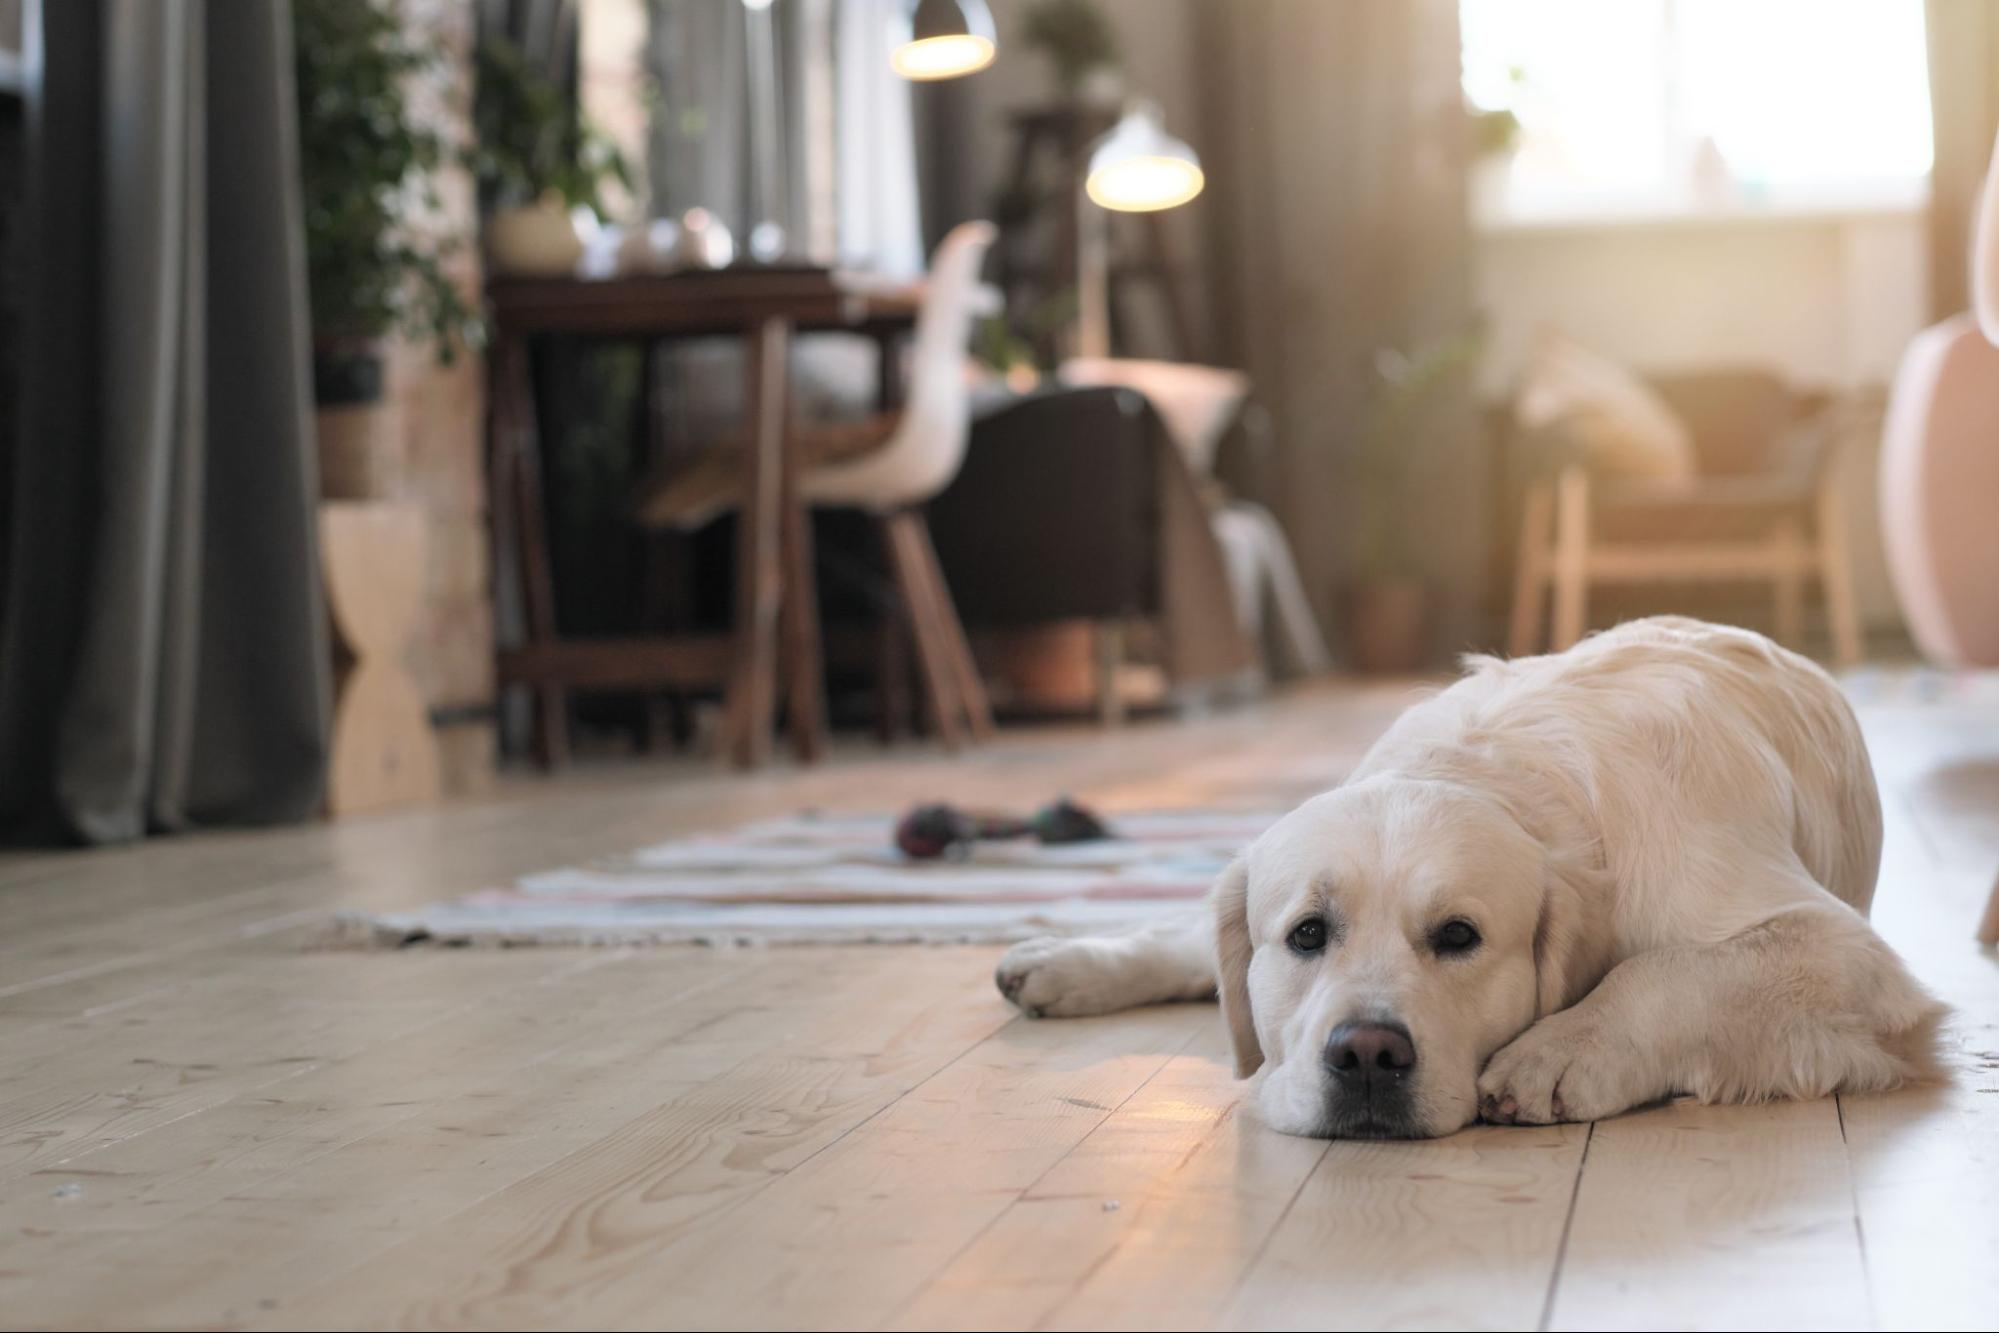 A dog lays on the floor of a home and looks at the camera